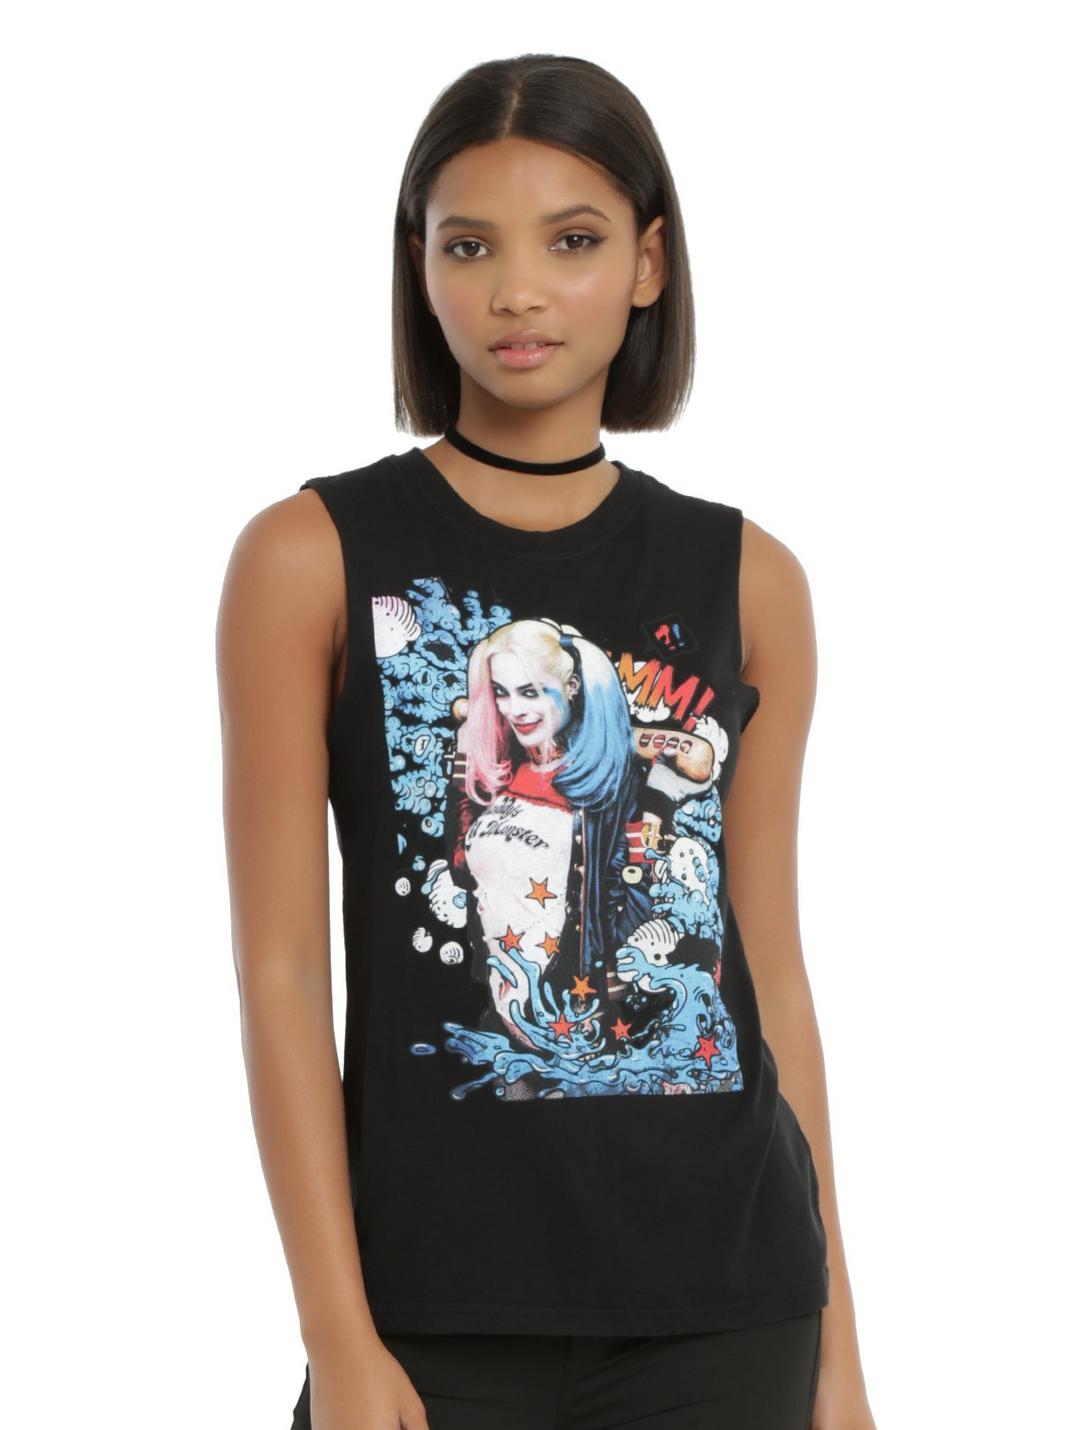 Suicide Squad Harley Quinn Cartoon Girls Muscle Top, BLACK, hi-res